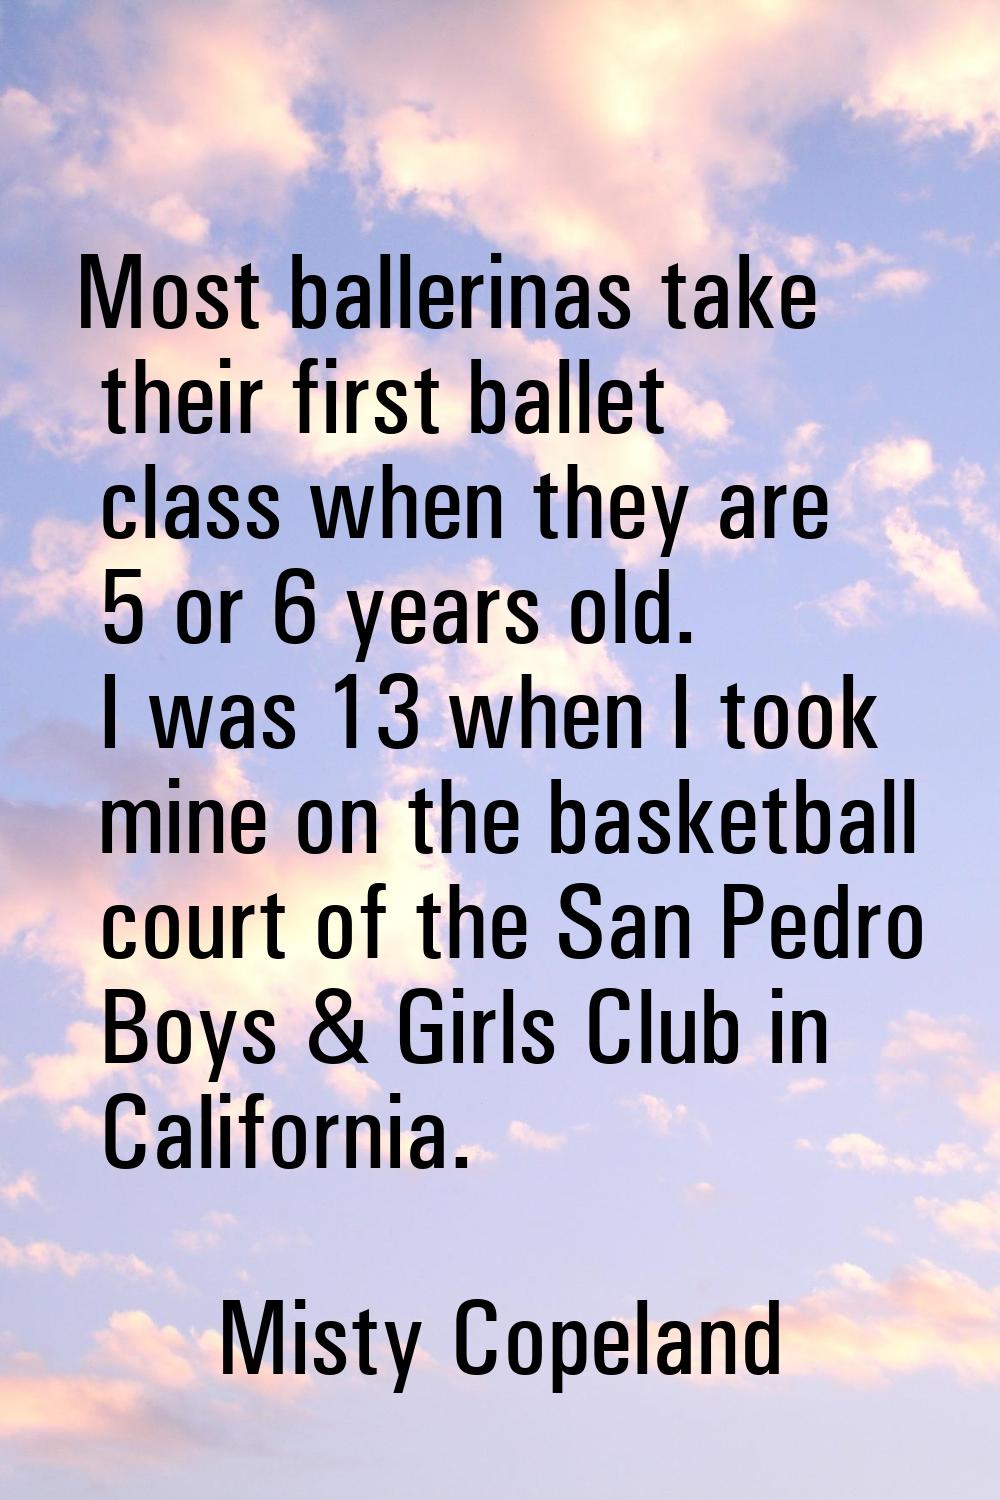 Most ballerinas take their first ballet class when they are 5 or 6 years old. I was 13 when I took 